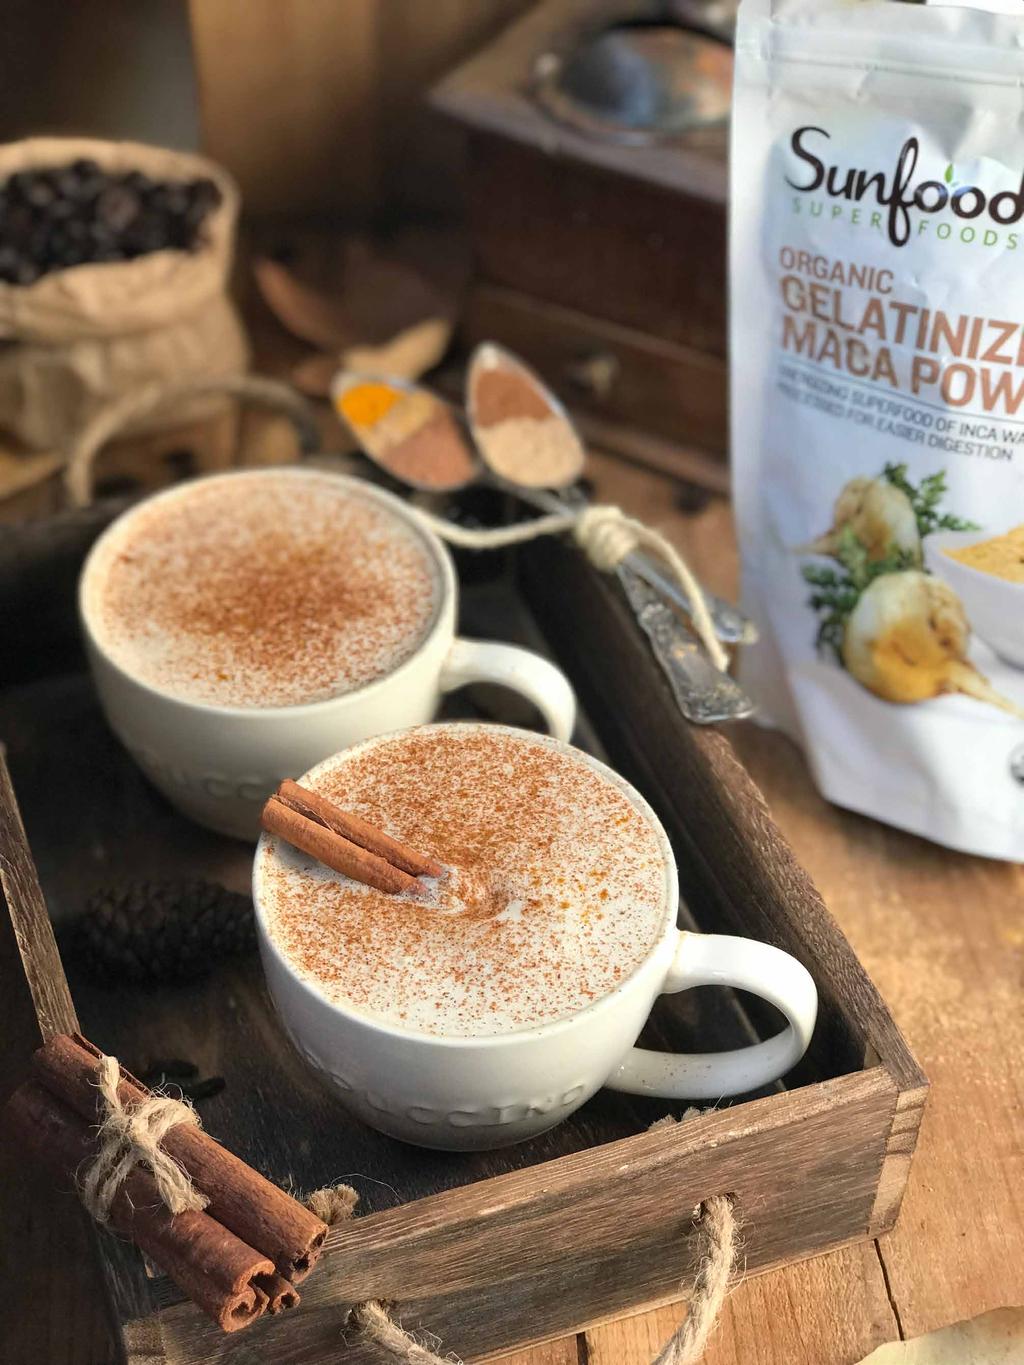 Golden Spice Cappuccino Servings: 1 1 cup brewed organic coffee 1/4 cup coconut milk or creamer 2 tsp coconut sugar 1/2 tsp Sunfood Cacao Powder 1/4 tsp Sunfood Maca Powder 1/4 tsp Sunfood Golden